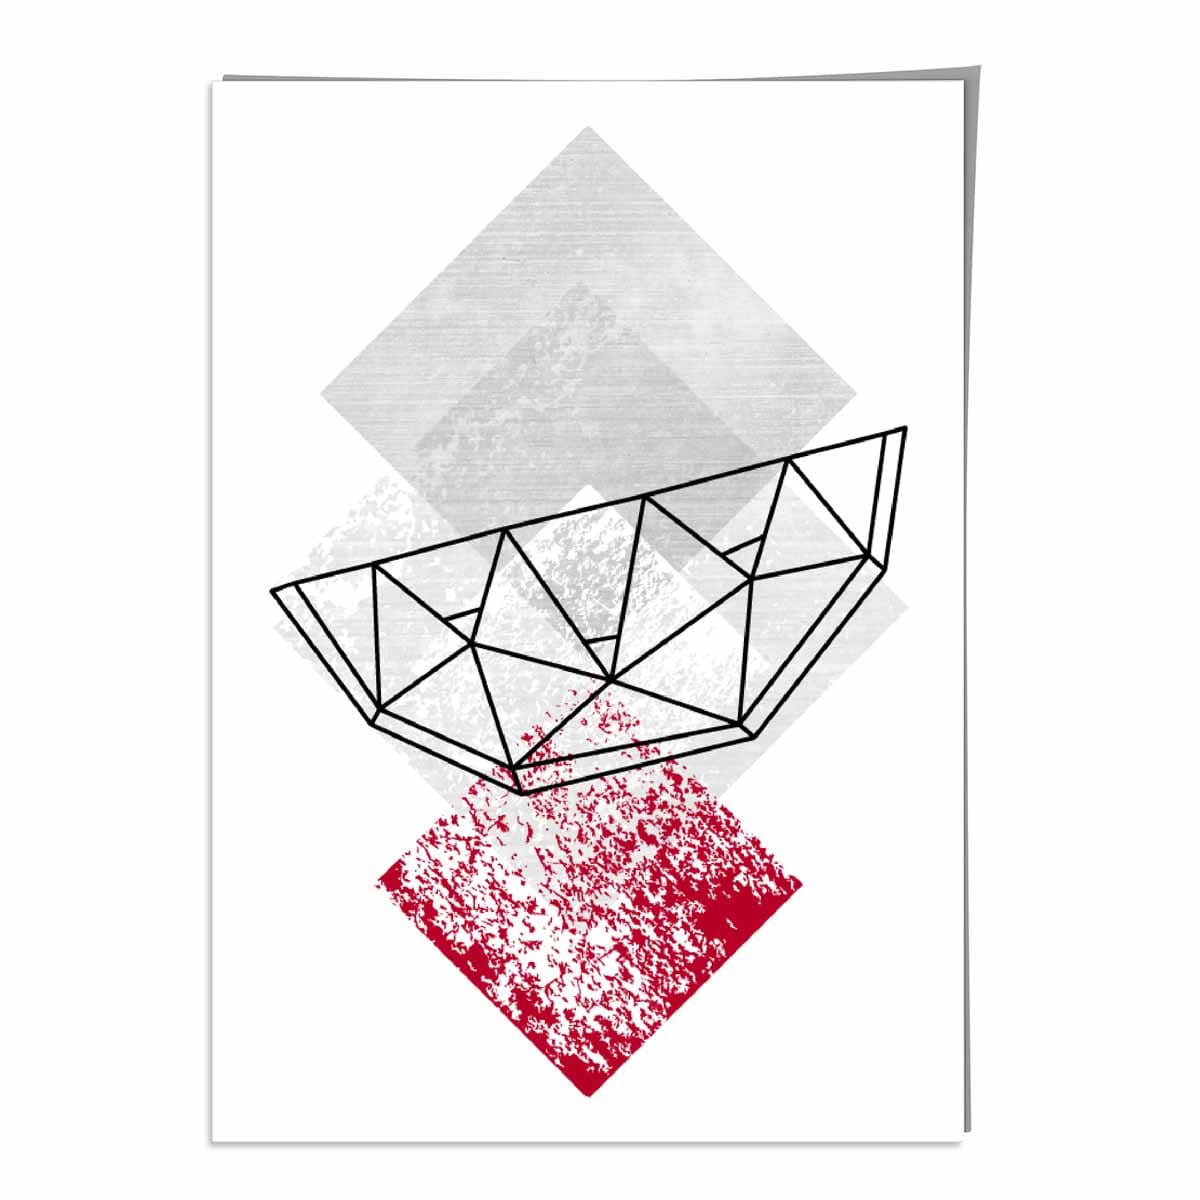 Geometric Fruit Line art Poster of Watermelon Textured Red Grey